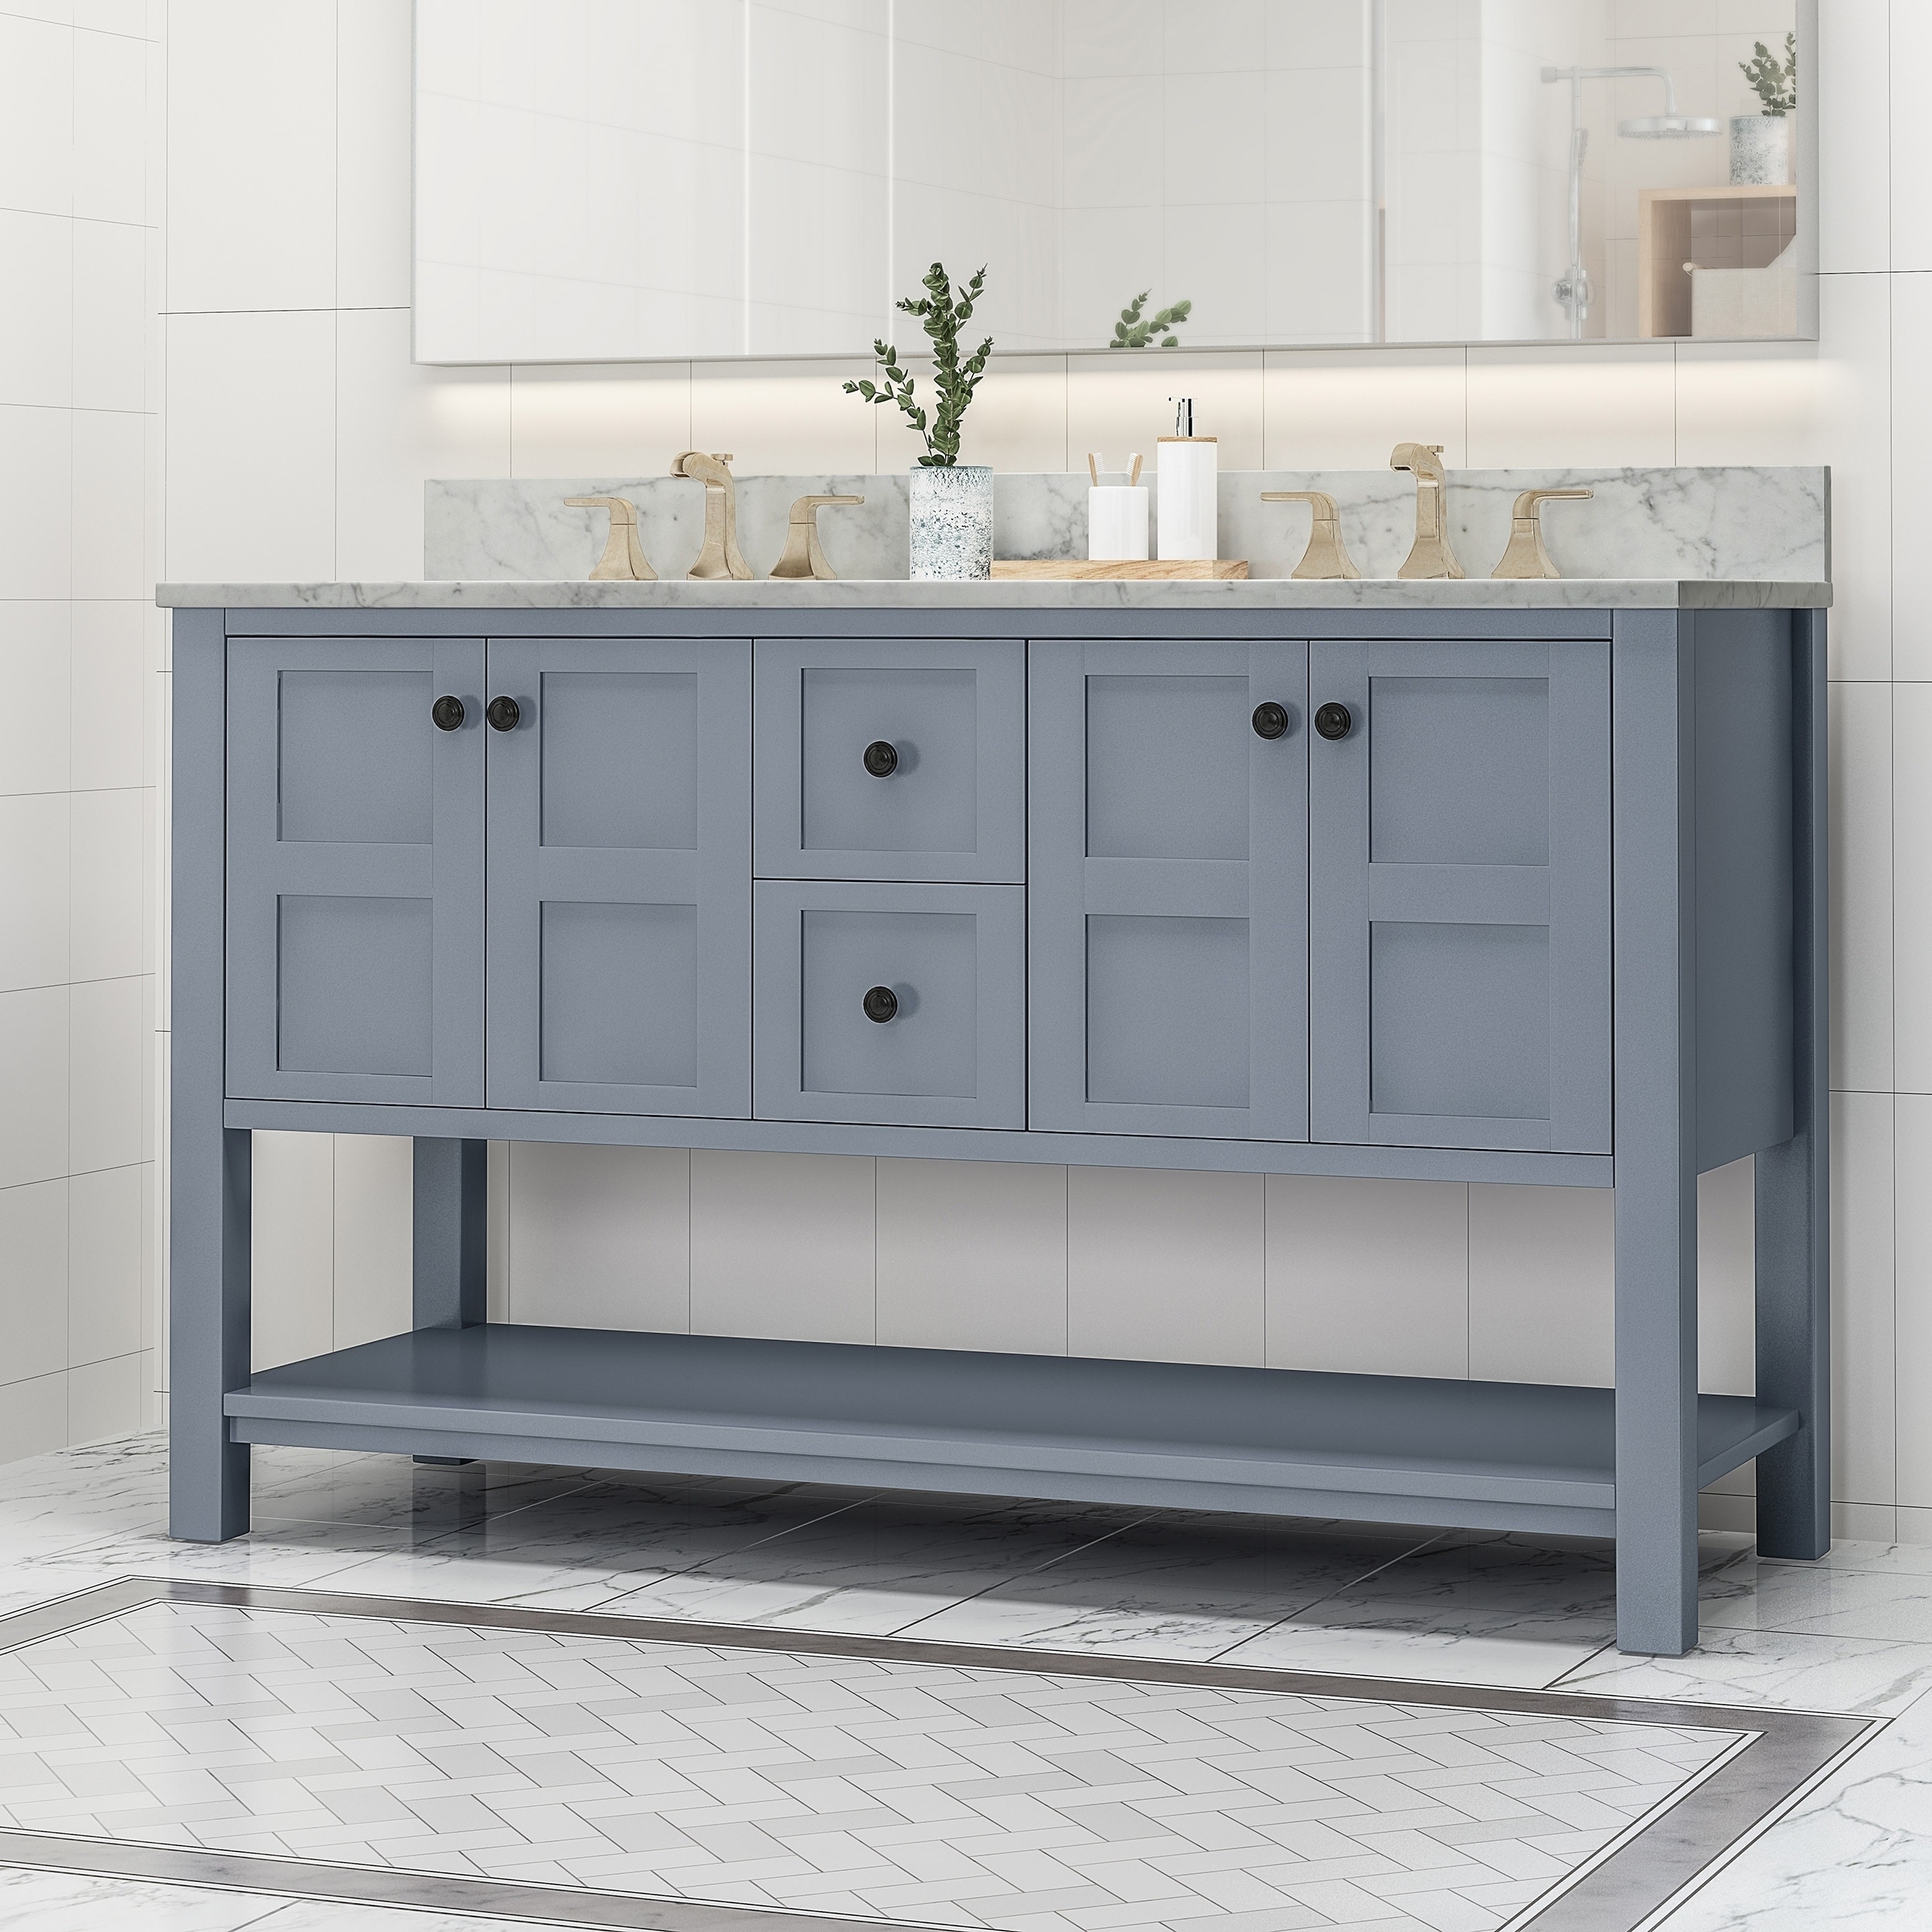 Jamison Contemporary 60 Wood Double Sink Bathroom Vanity With Carrera Marble Top By Christopher Knight Home